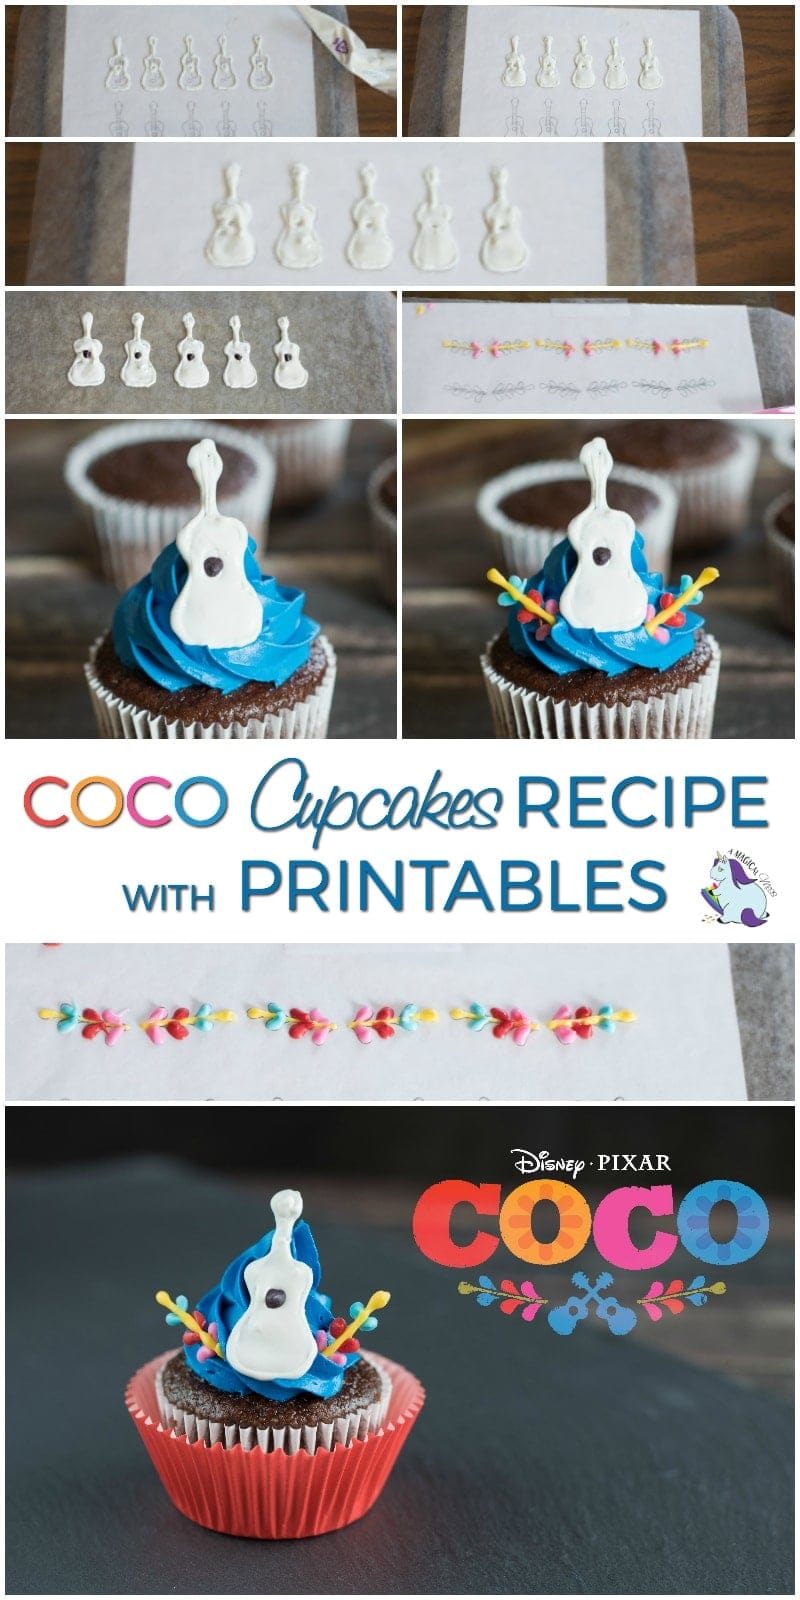 Coco Inspired Cupcakes Recipe with Printables